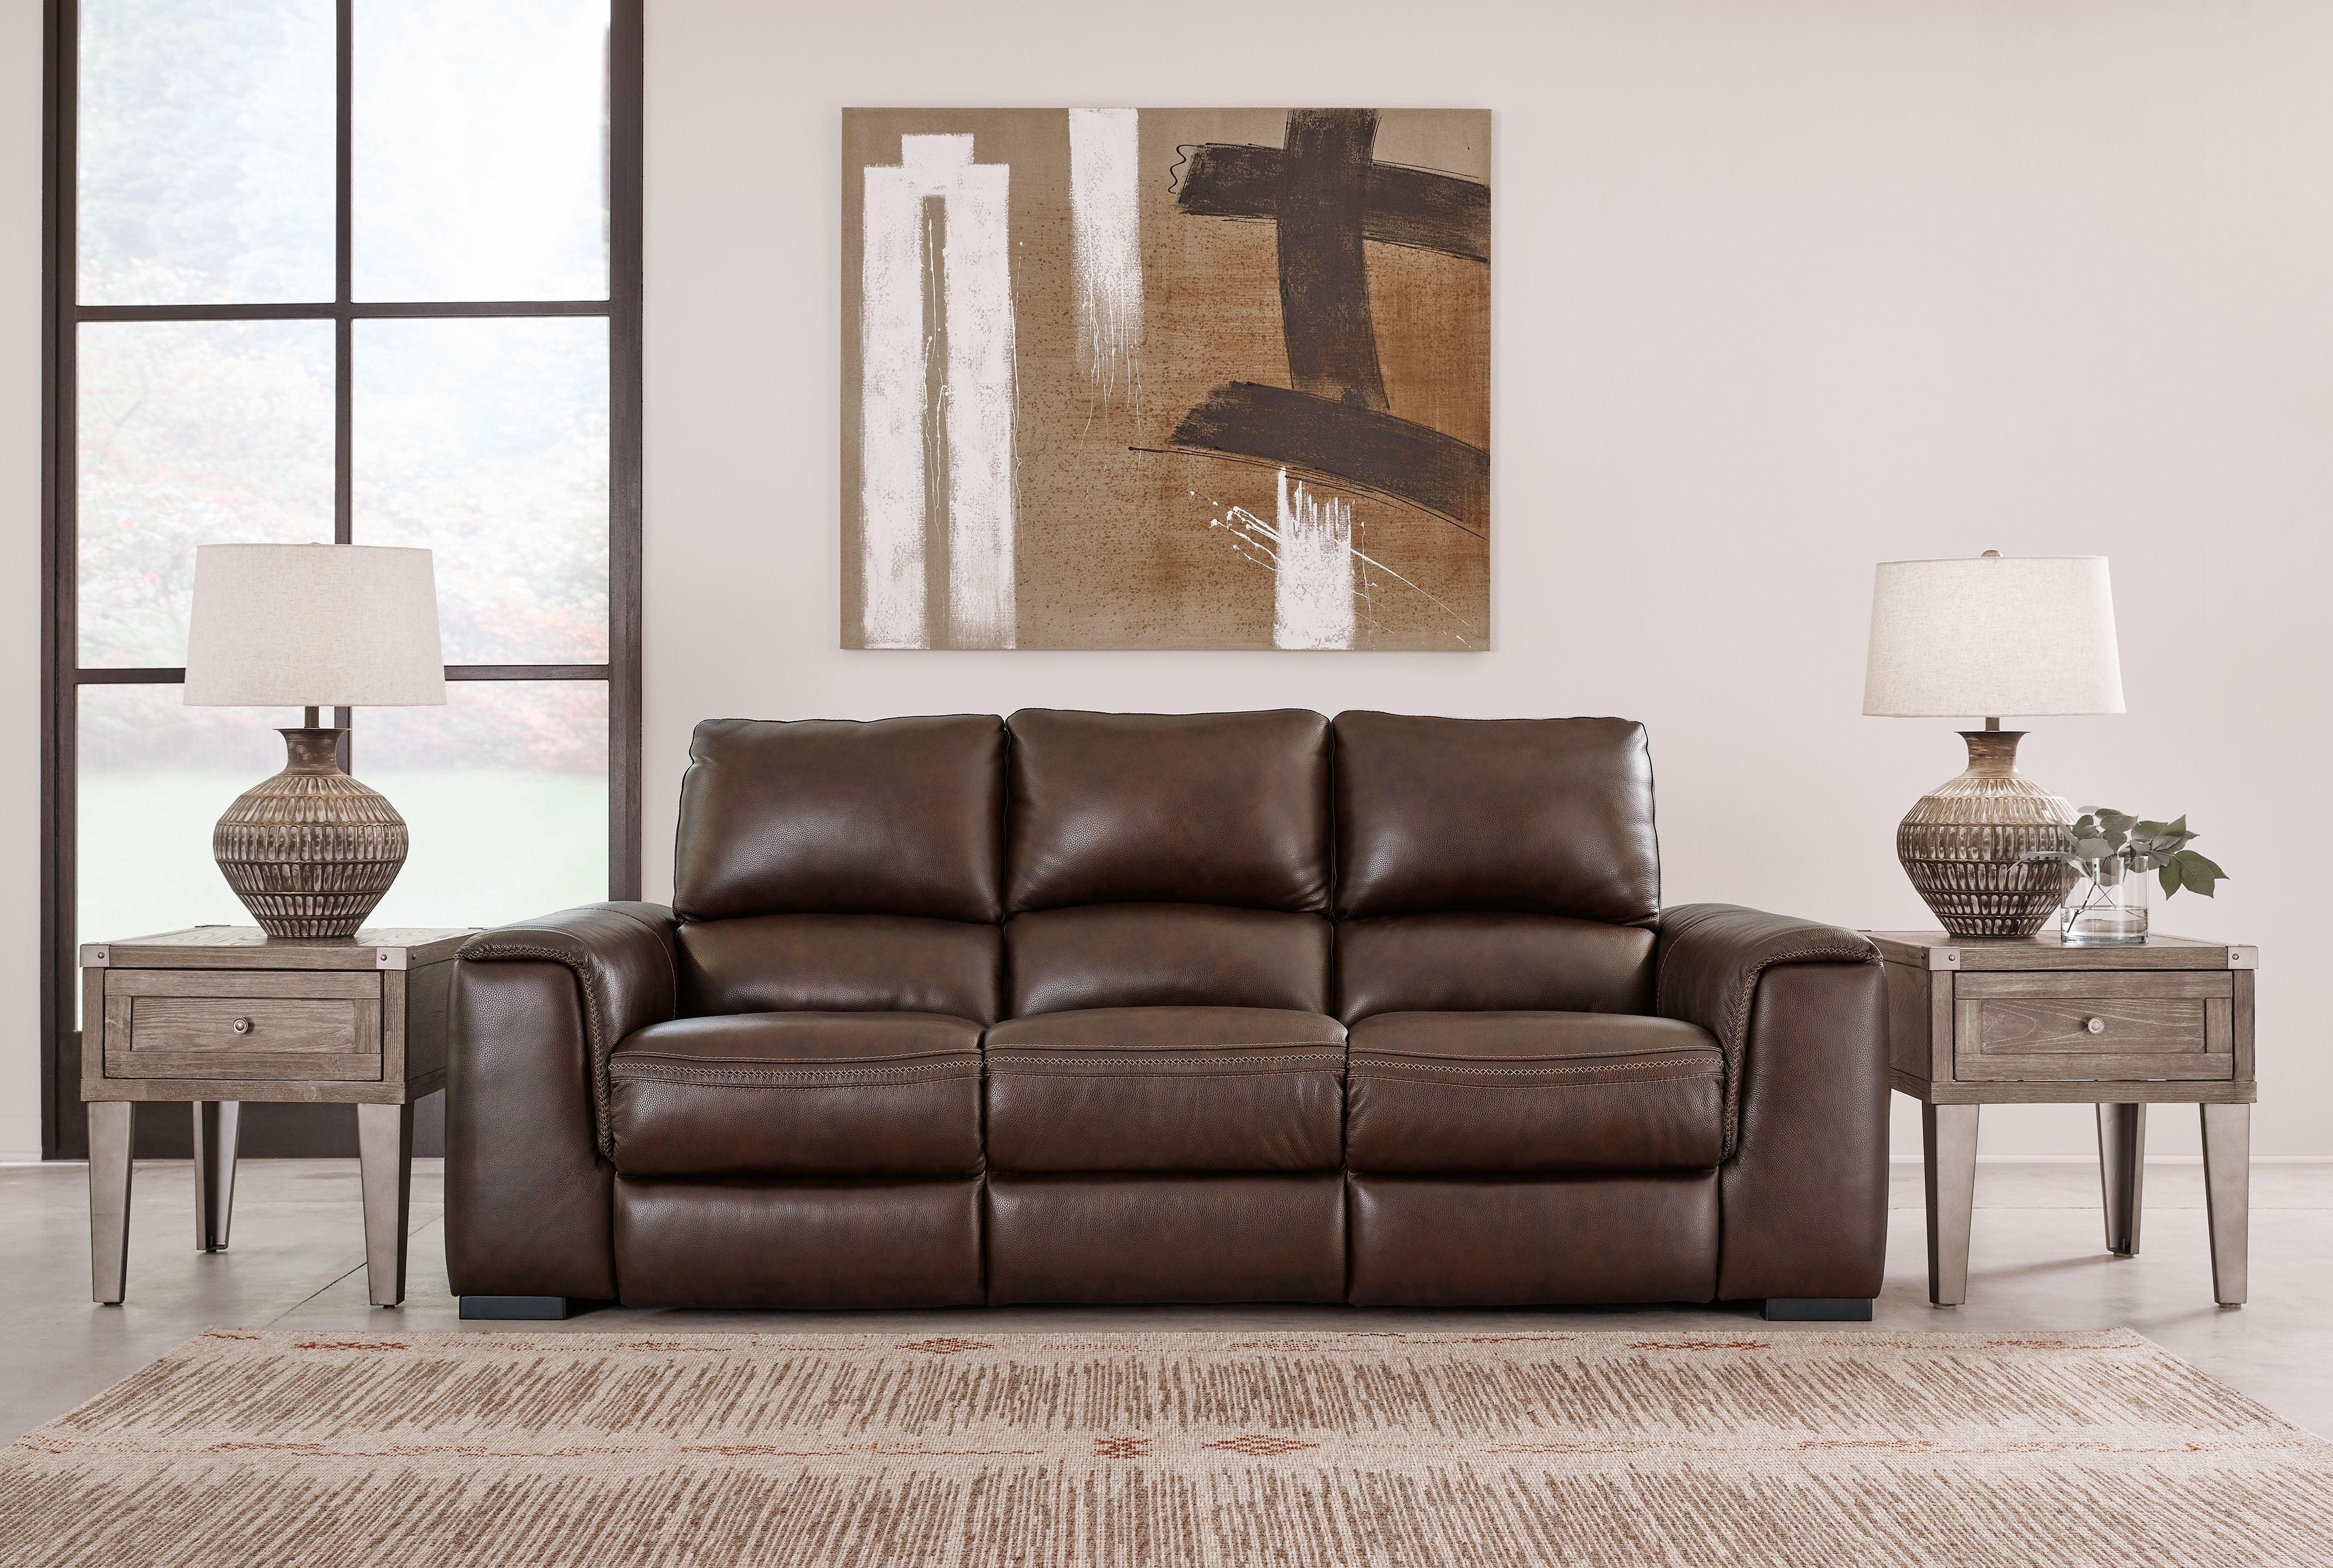 Signature Design by Ashley® - Alessandro - Living Room Set - 5th Avenue Furniture